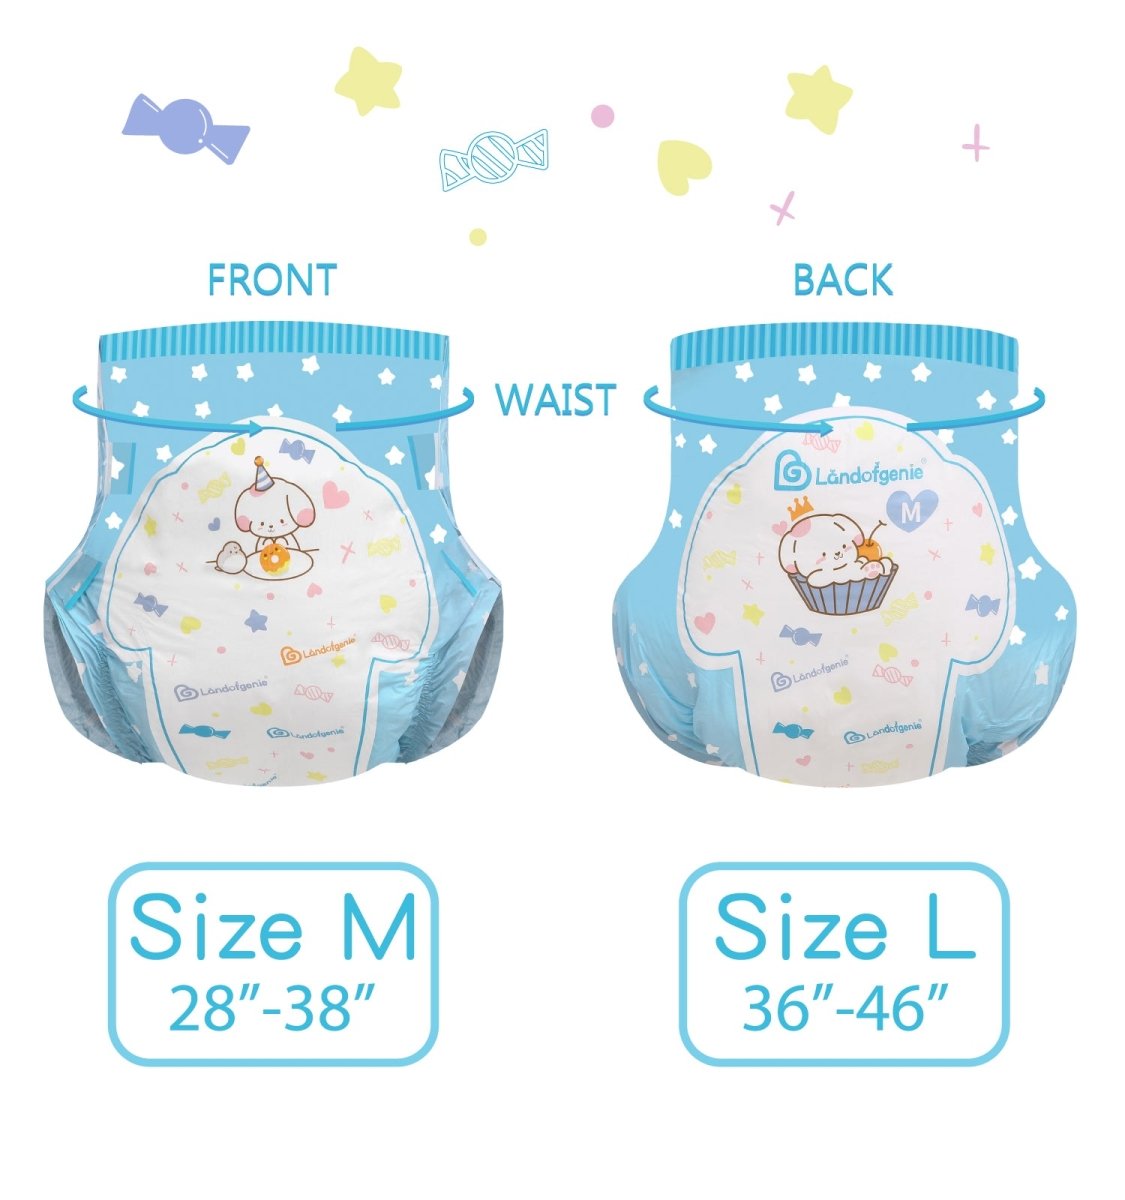  Landofgenie Adult Diapers for Women with Tabs Printed Adult  Diapers ABDL Diapers Medium 10 Pieces (Medium 28-38) : Baby